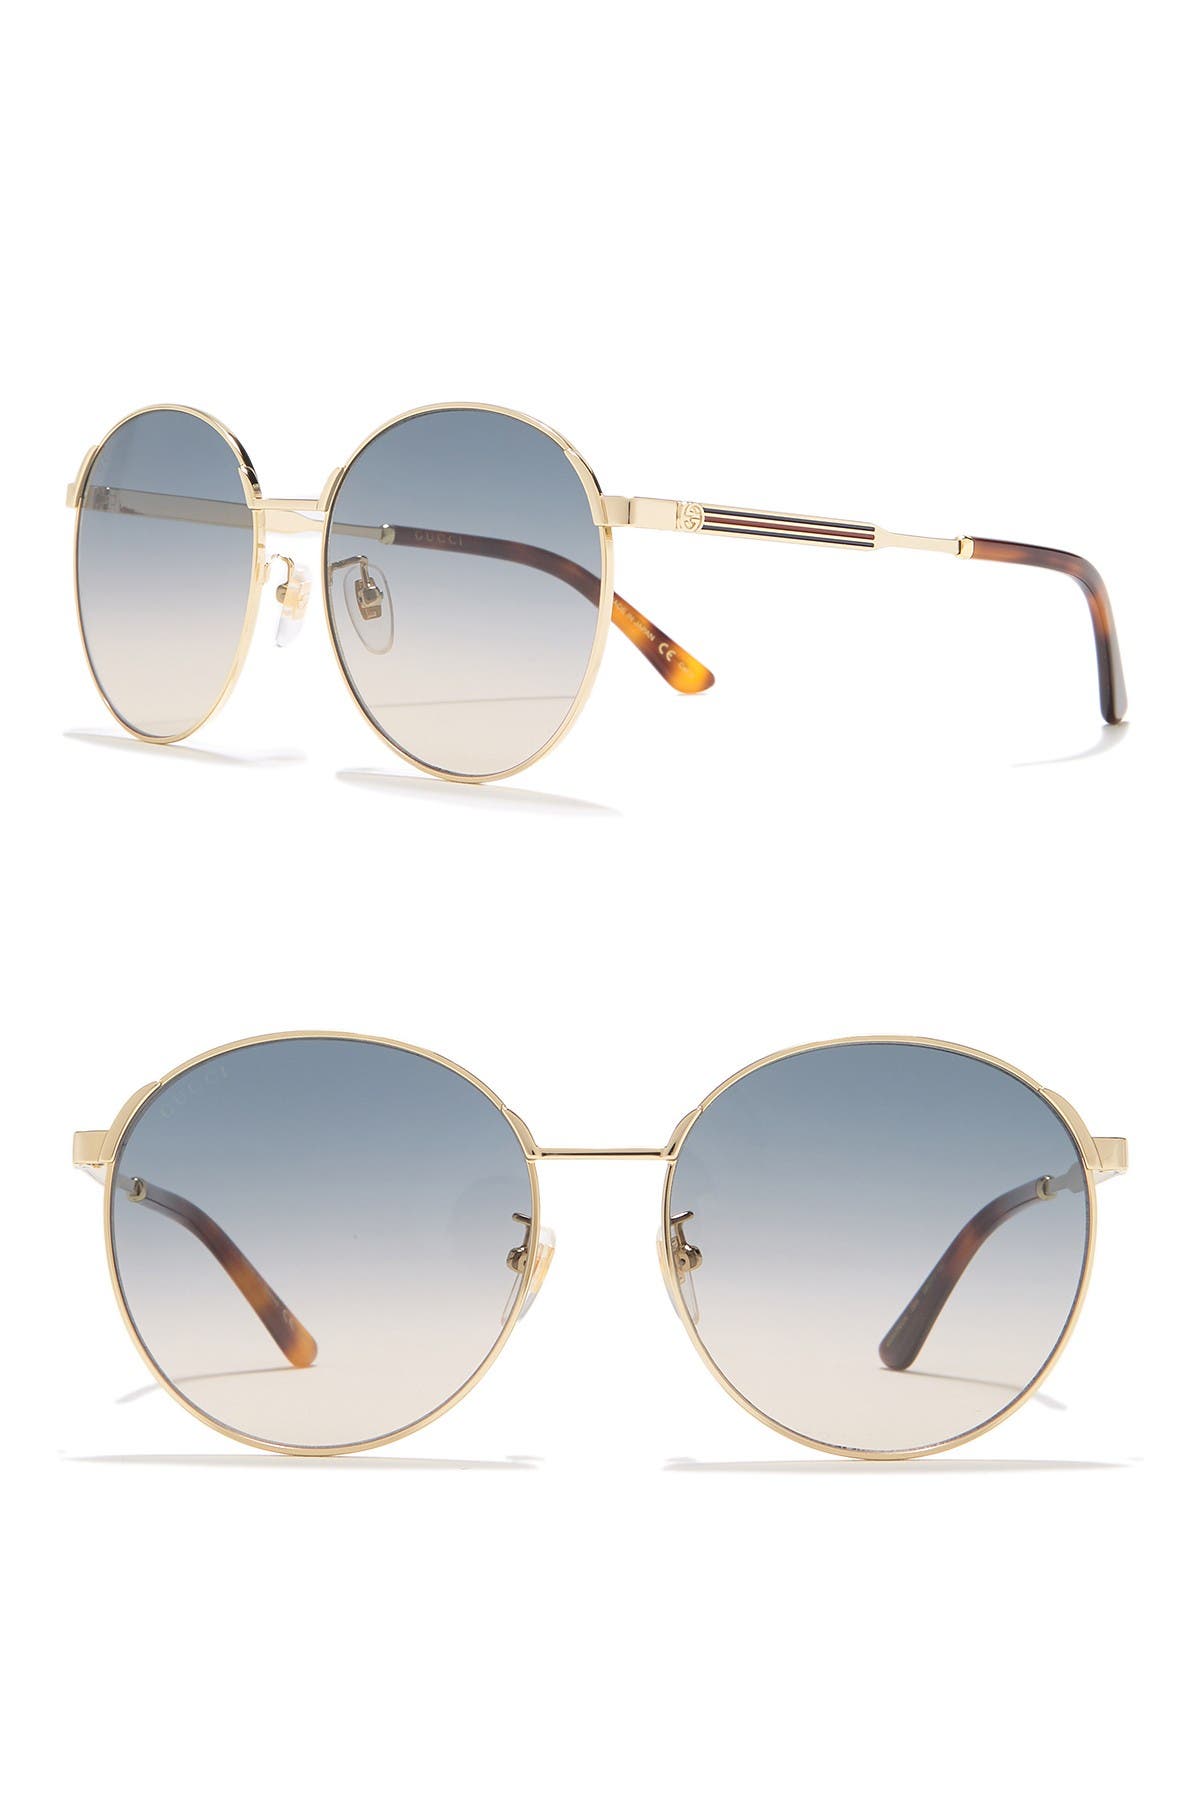 Gucci 58mm Round Metal Frame Sunglasses In Gold